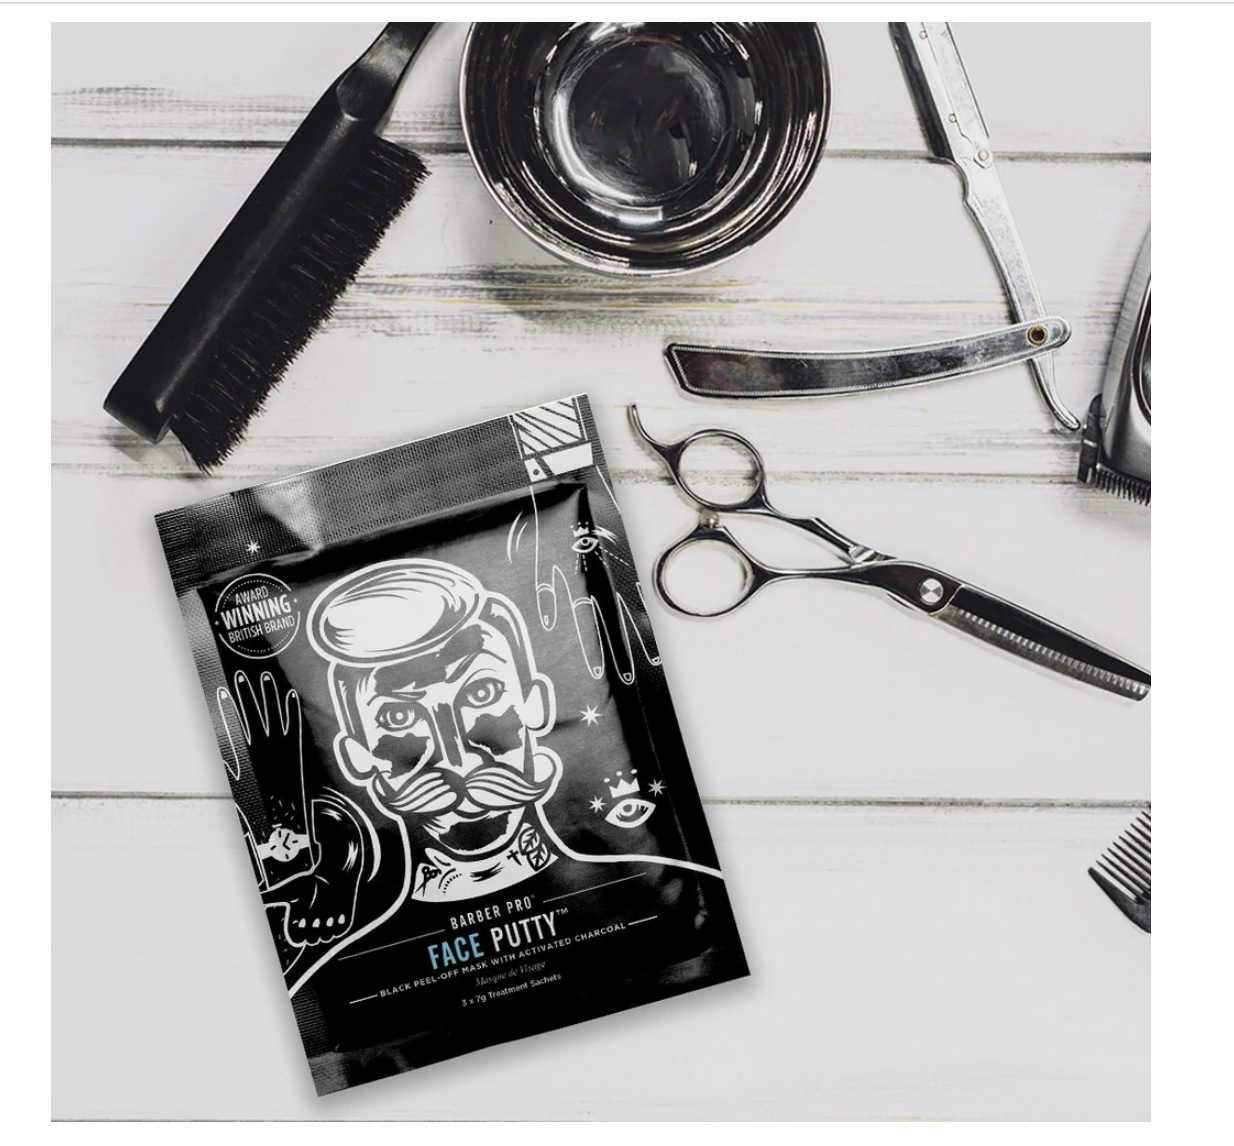 BarberPro Face Putty Peel-Off Mask with Activated Charcoal